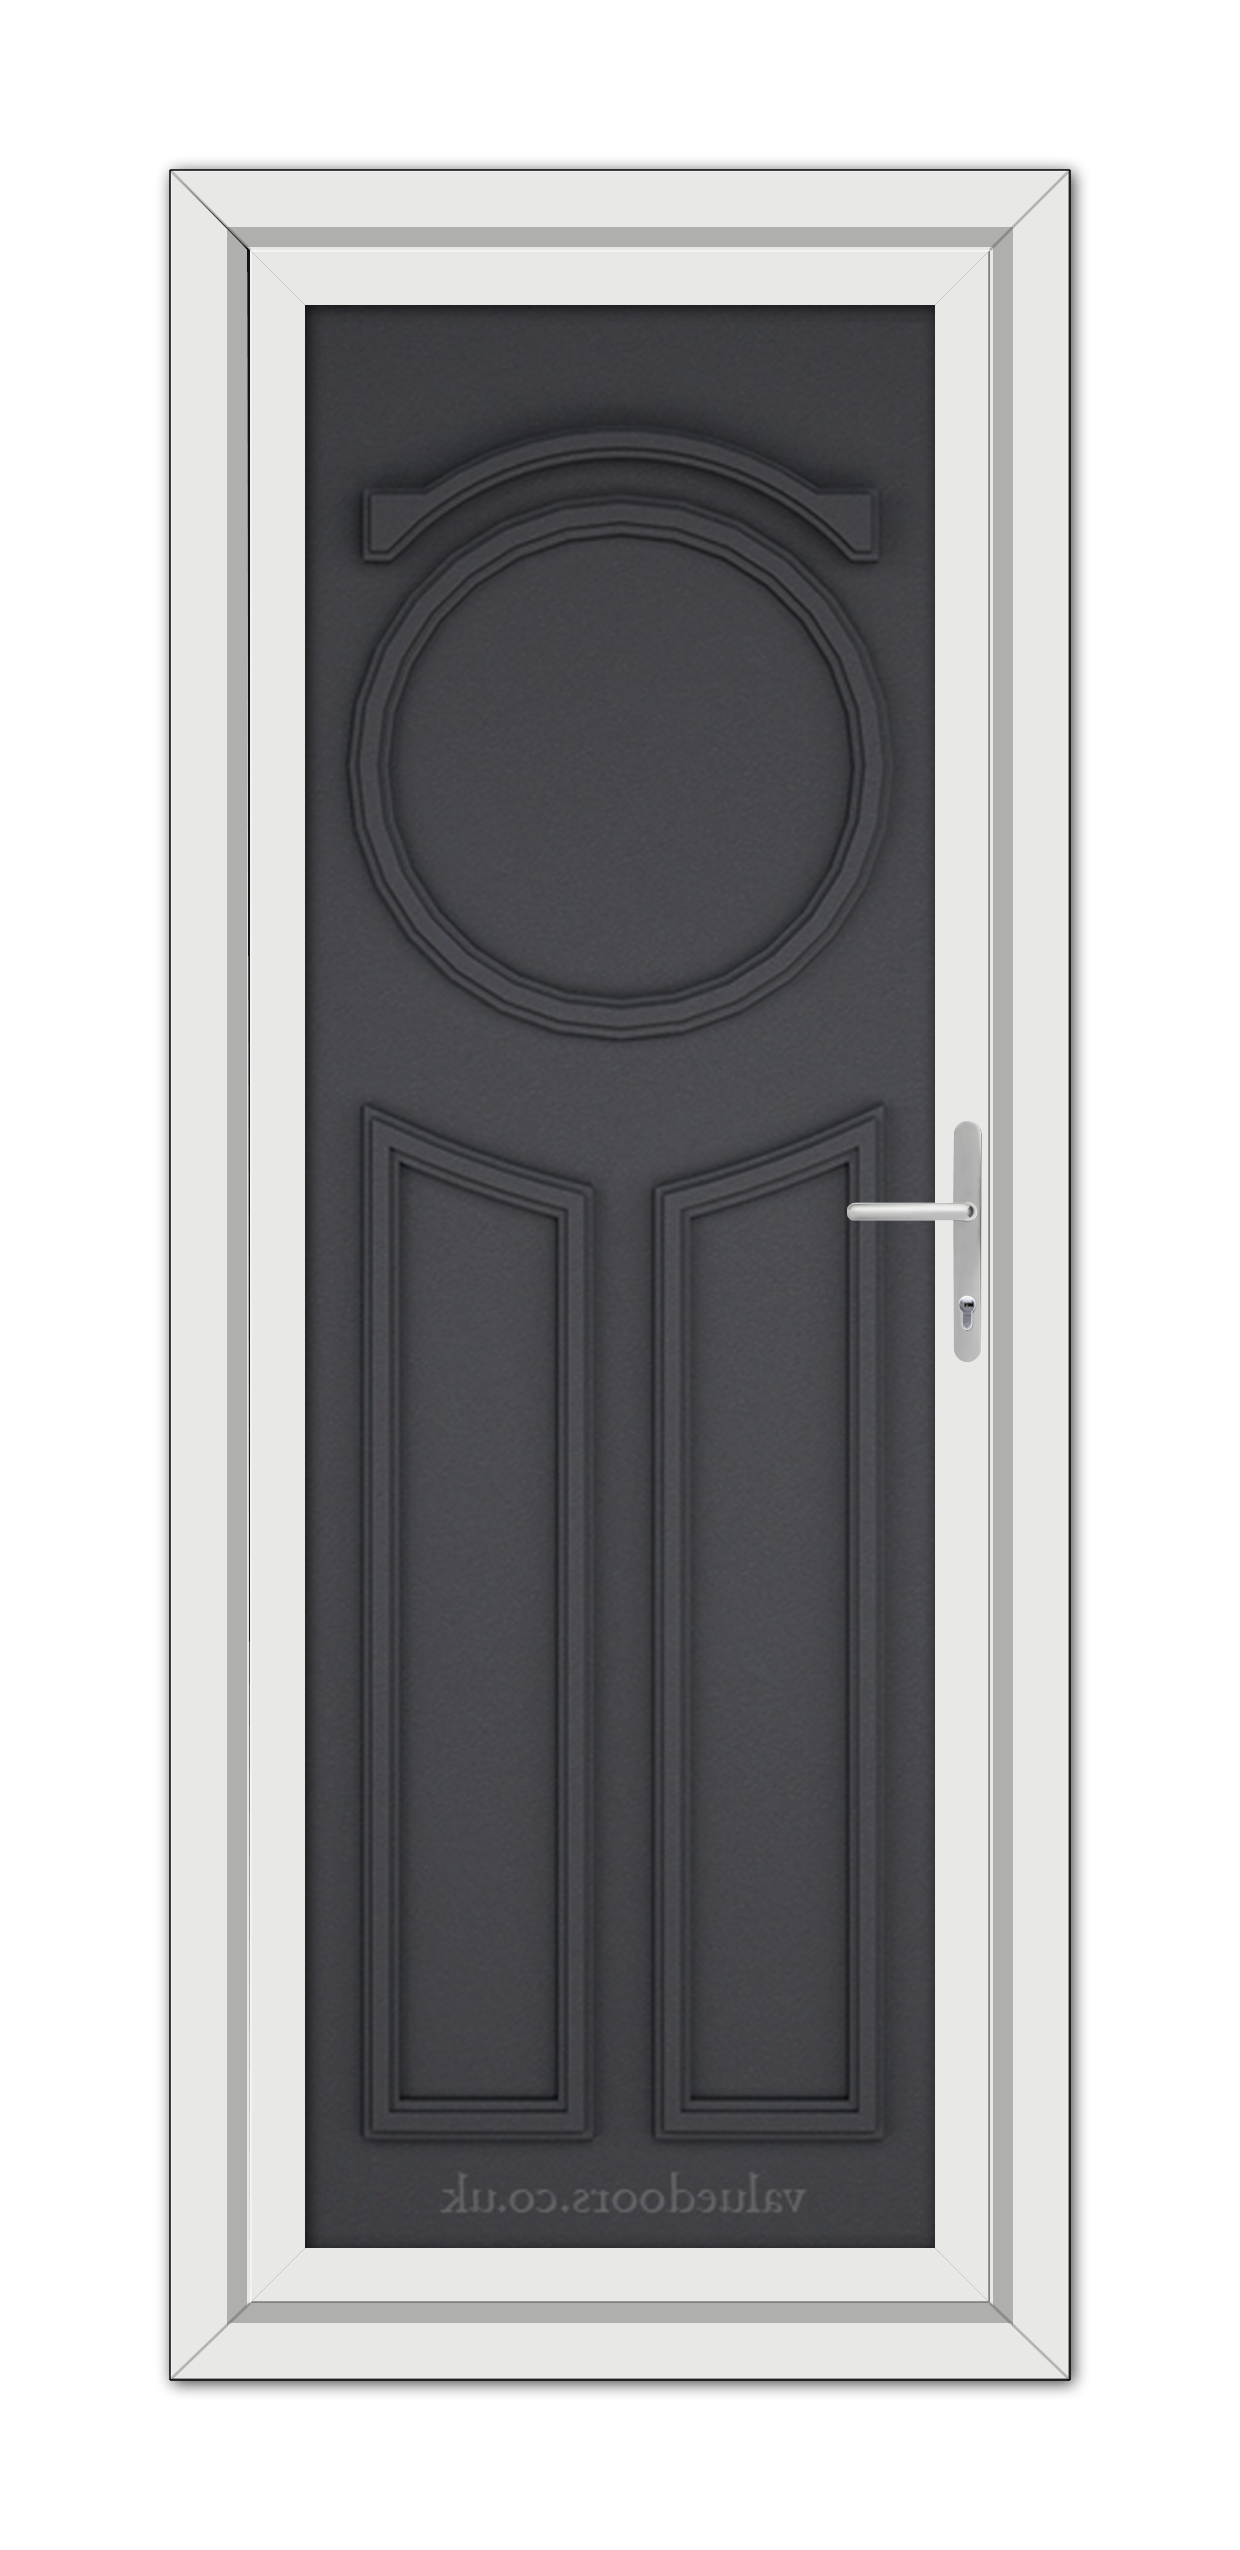 A modern Grey Grained Blenheim Solid uPVC Door with a round window, set within a white frame, featuring a sleek metal handle on the right side.